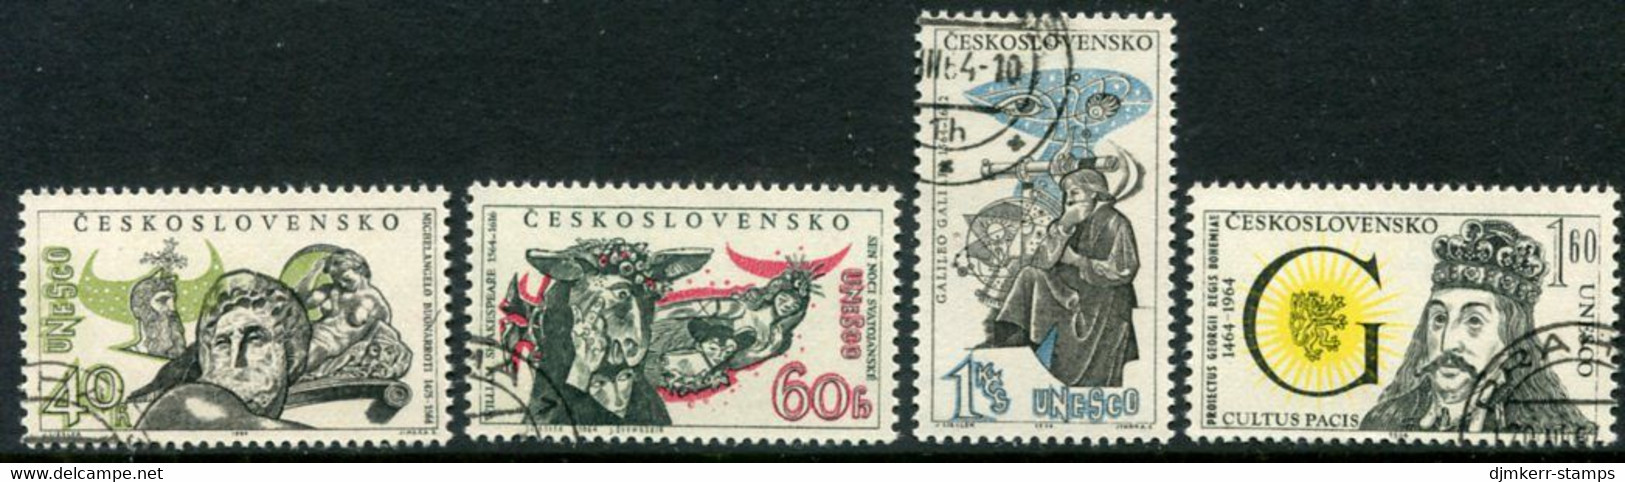 CZECHOSLOVAKIA 1964 Historical Personalities Used. Michel 1459-62 - Used Stamps